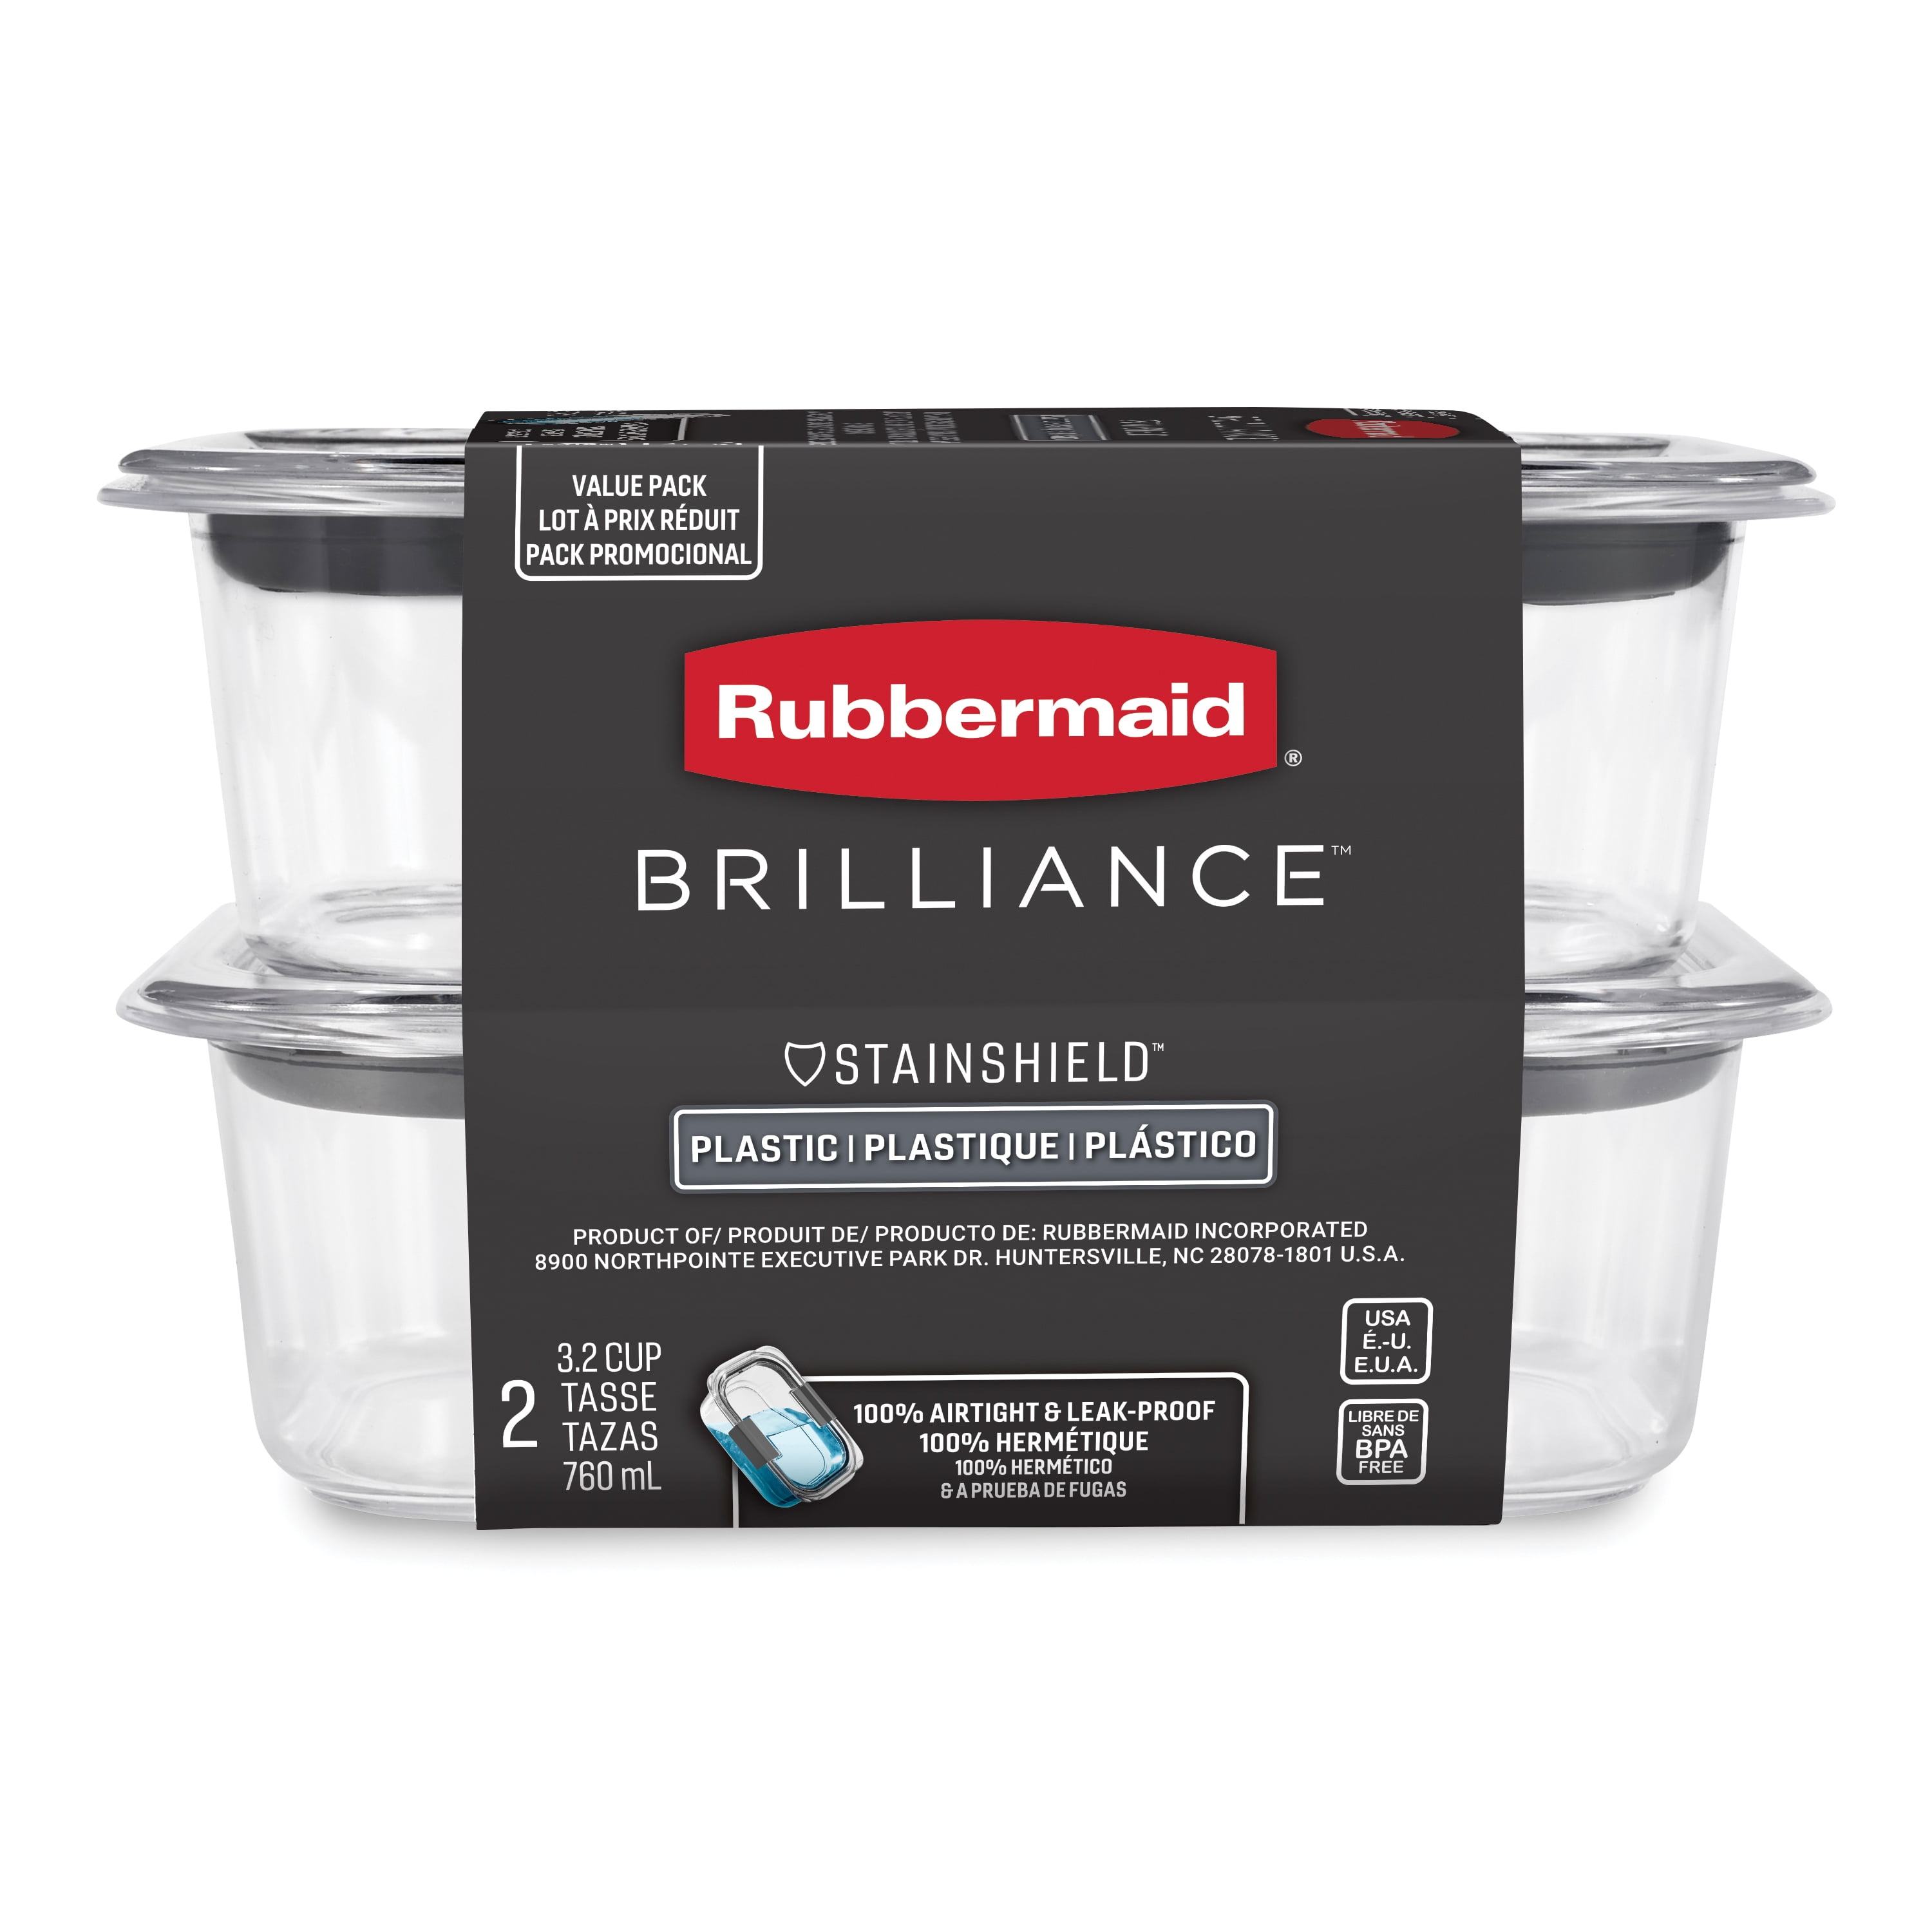 Rubbermaid 12-Piece Brilliance Food Storage with Dressing Container,  Clear/Grey & Brilliance Glass Storage 3.2-Cup Food Containers with Lids,  BPA Free